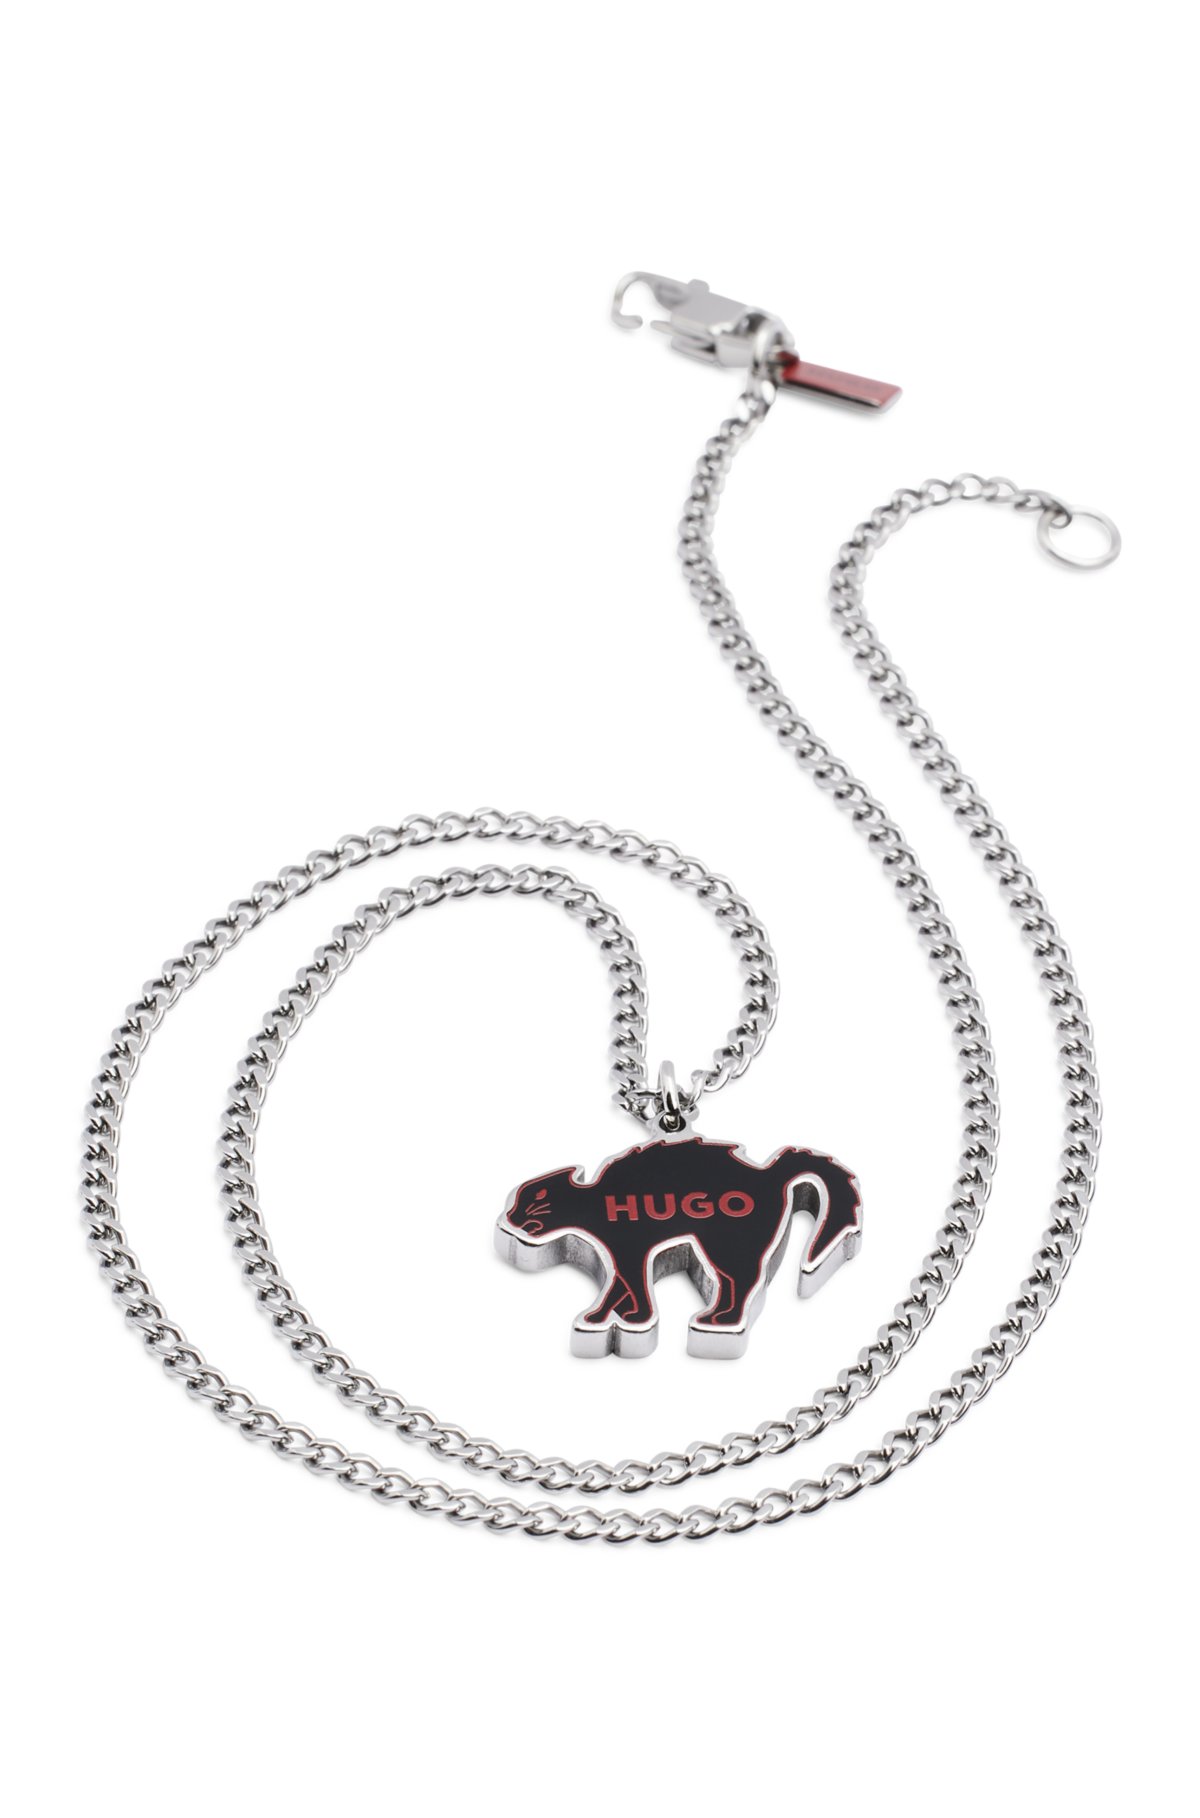 Chain necklace with branded pendant, Silver